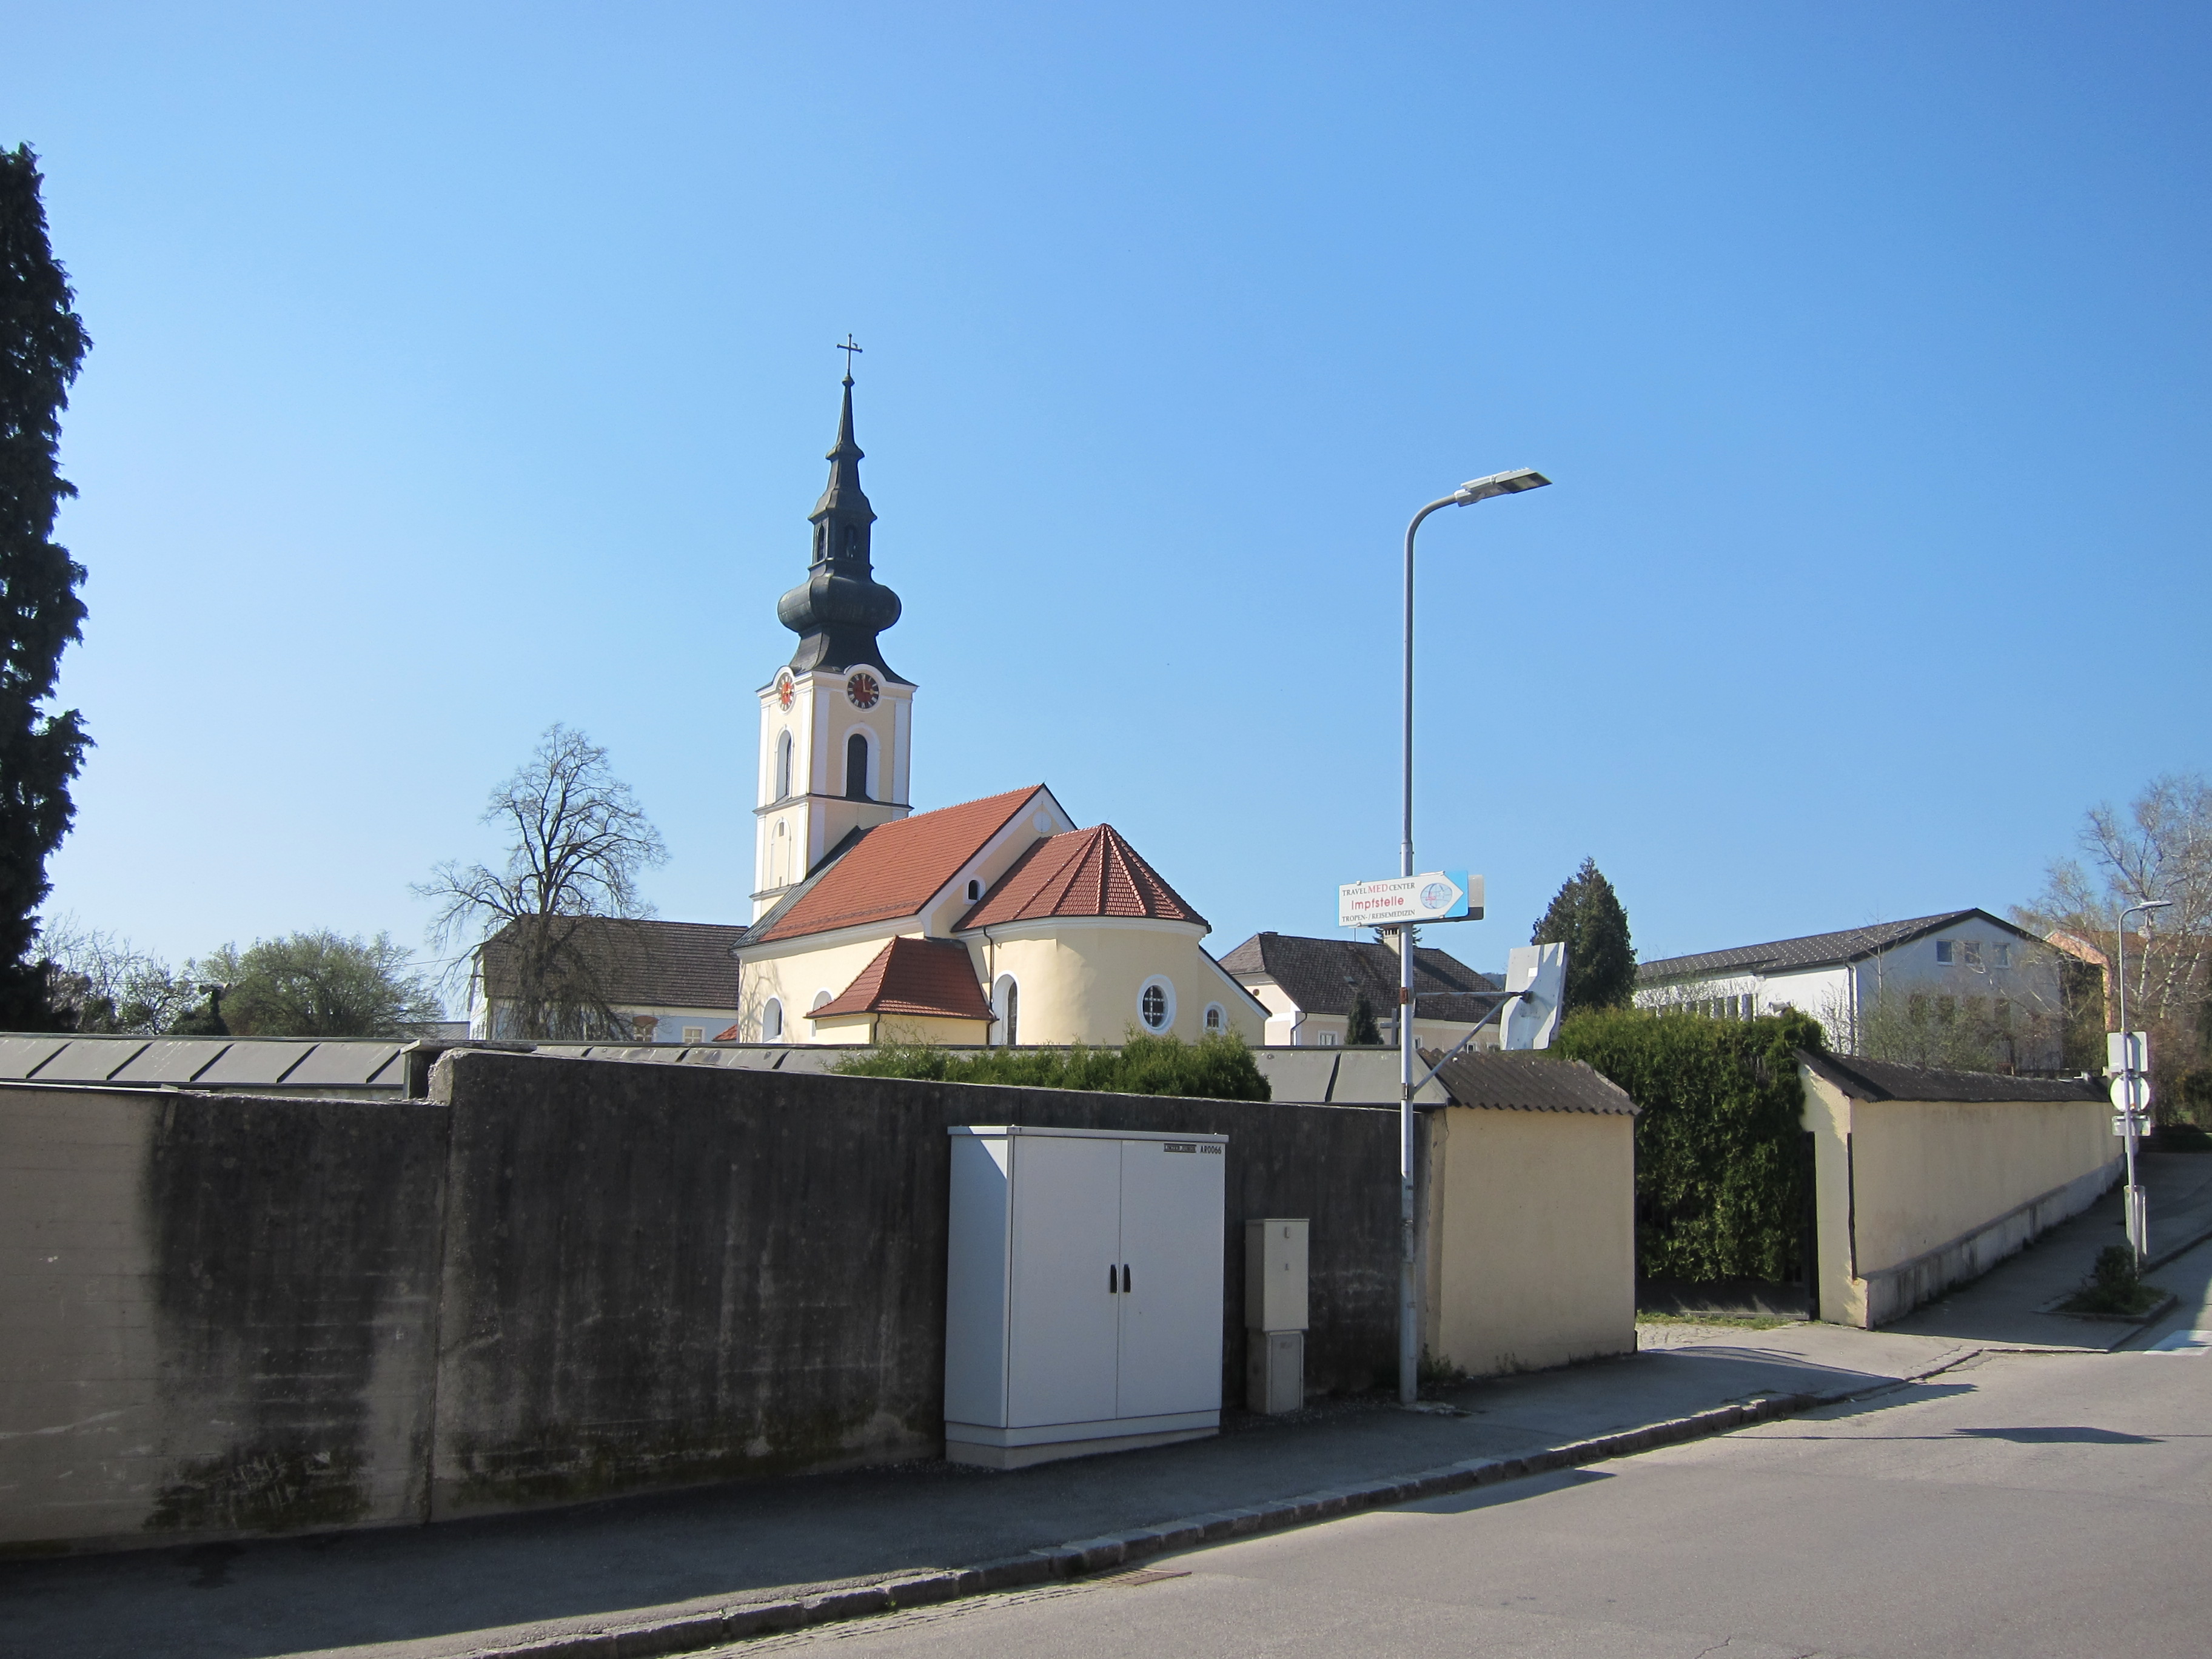 View of Church from house